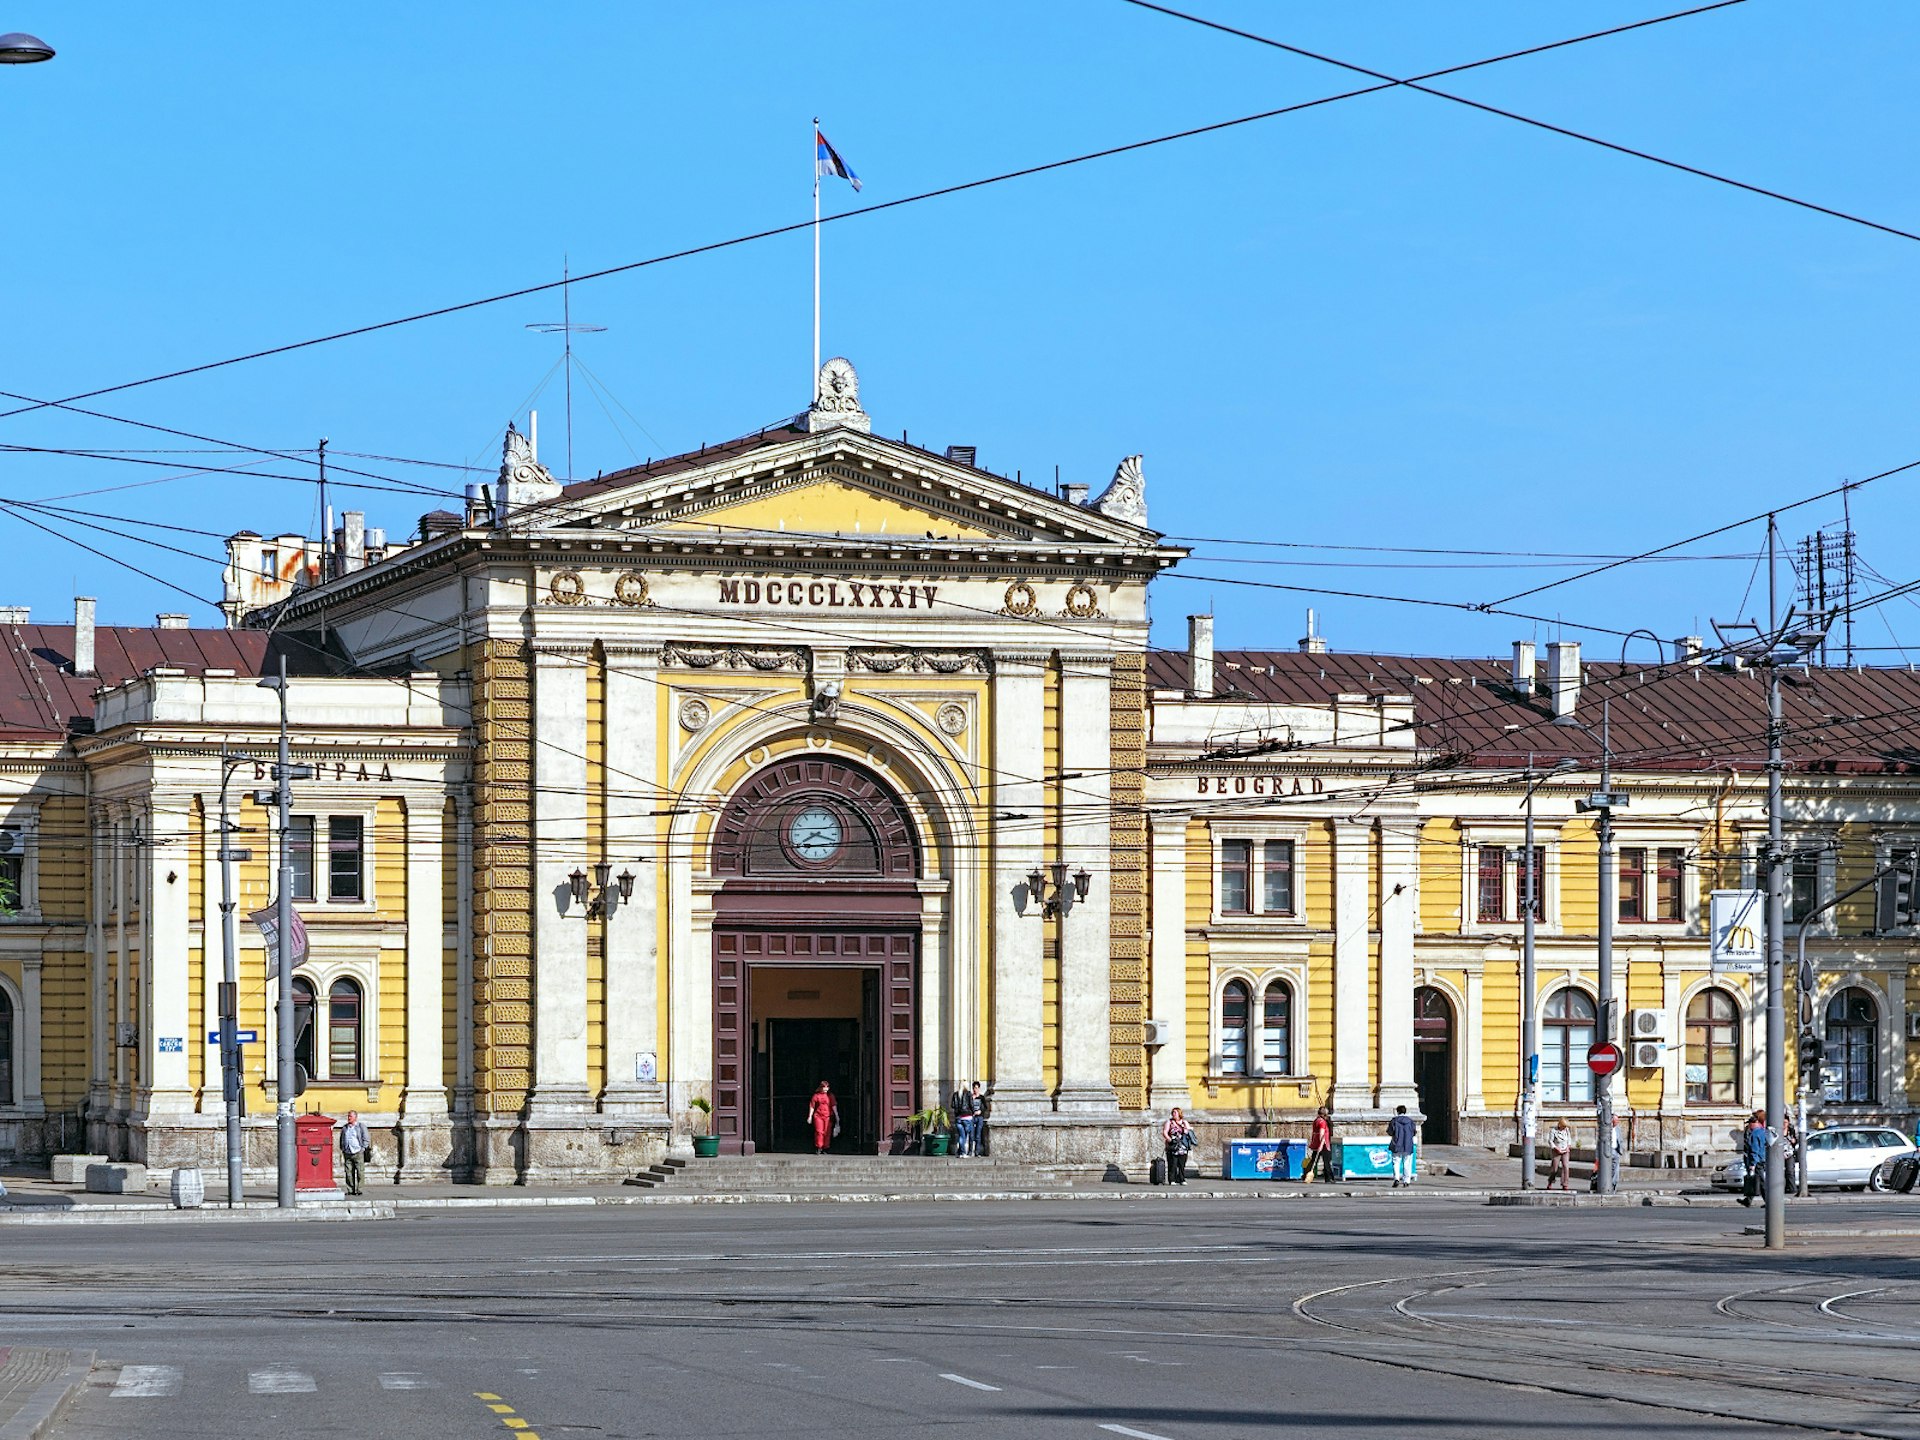 External view of Belgrade’s weathered train station